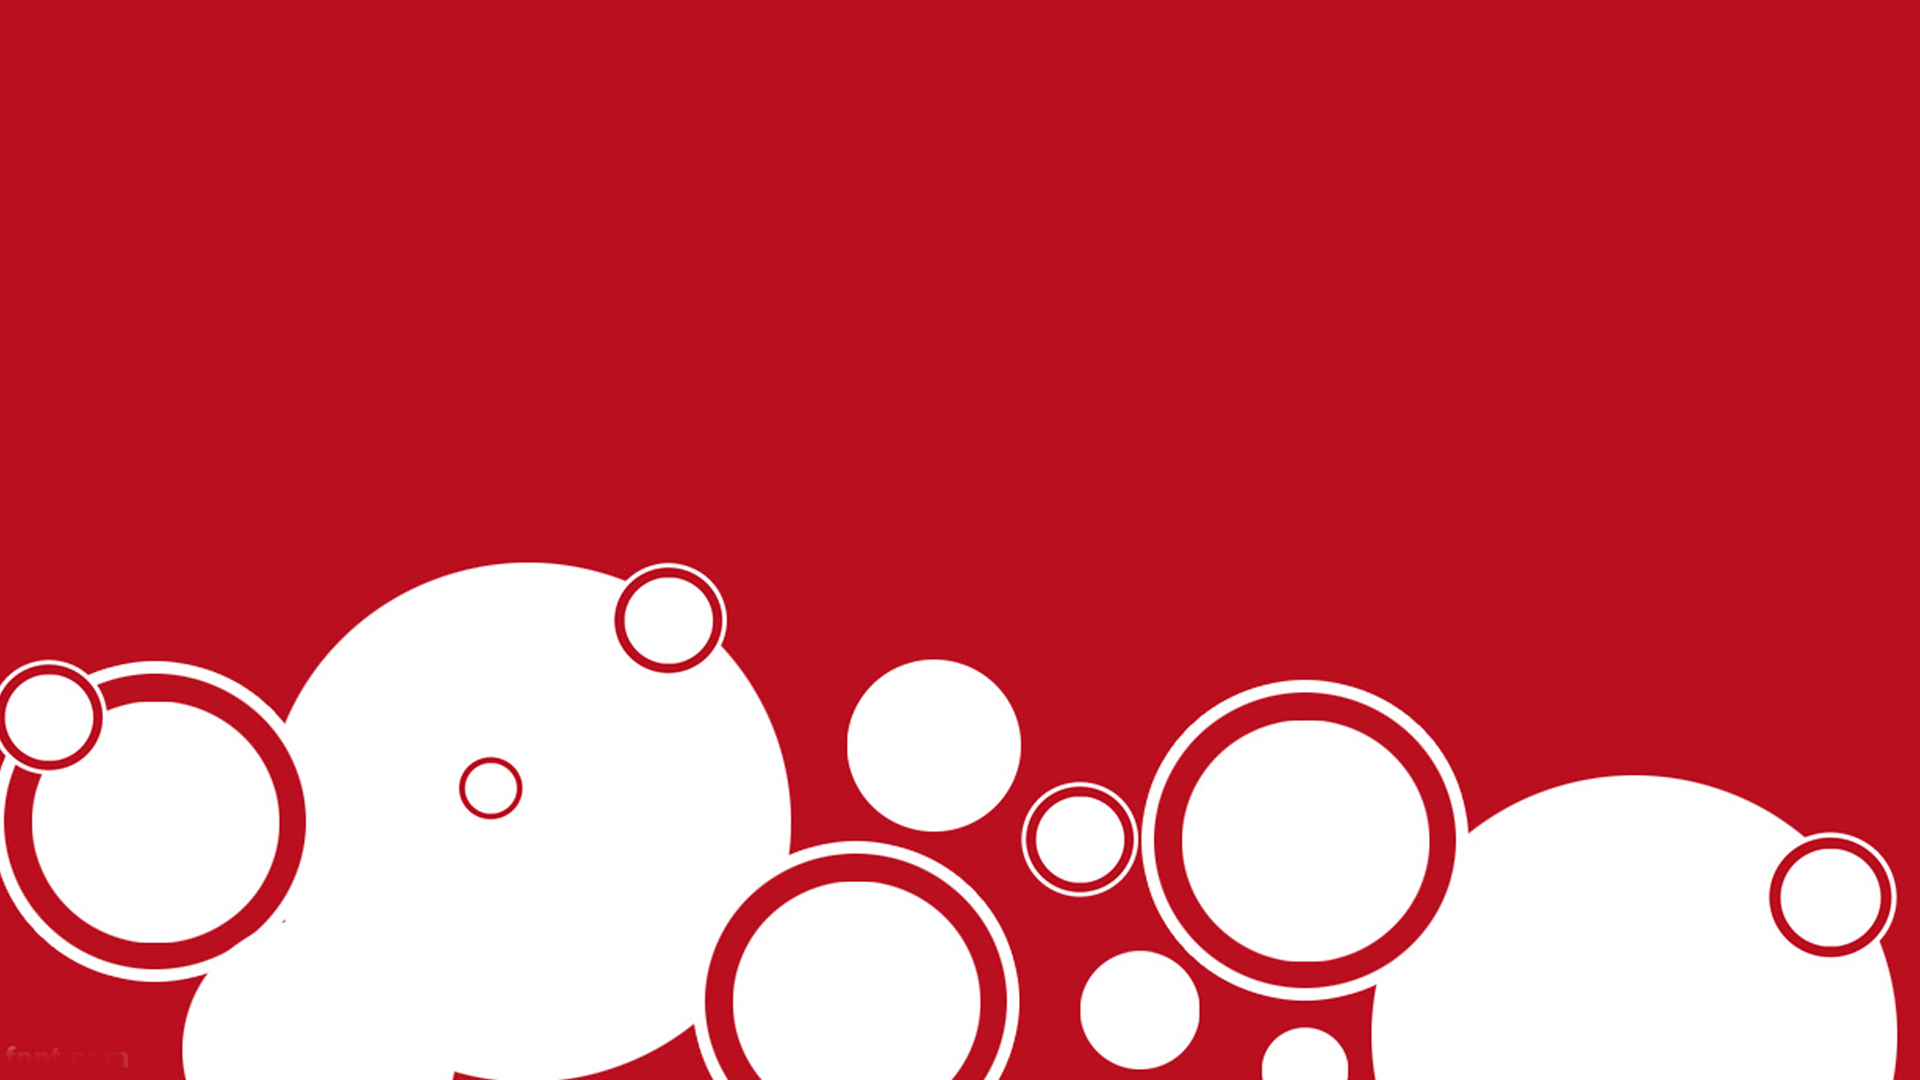 Abstract Circle Red Background 1920x1080